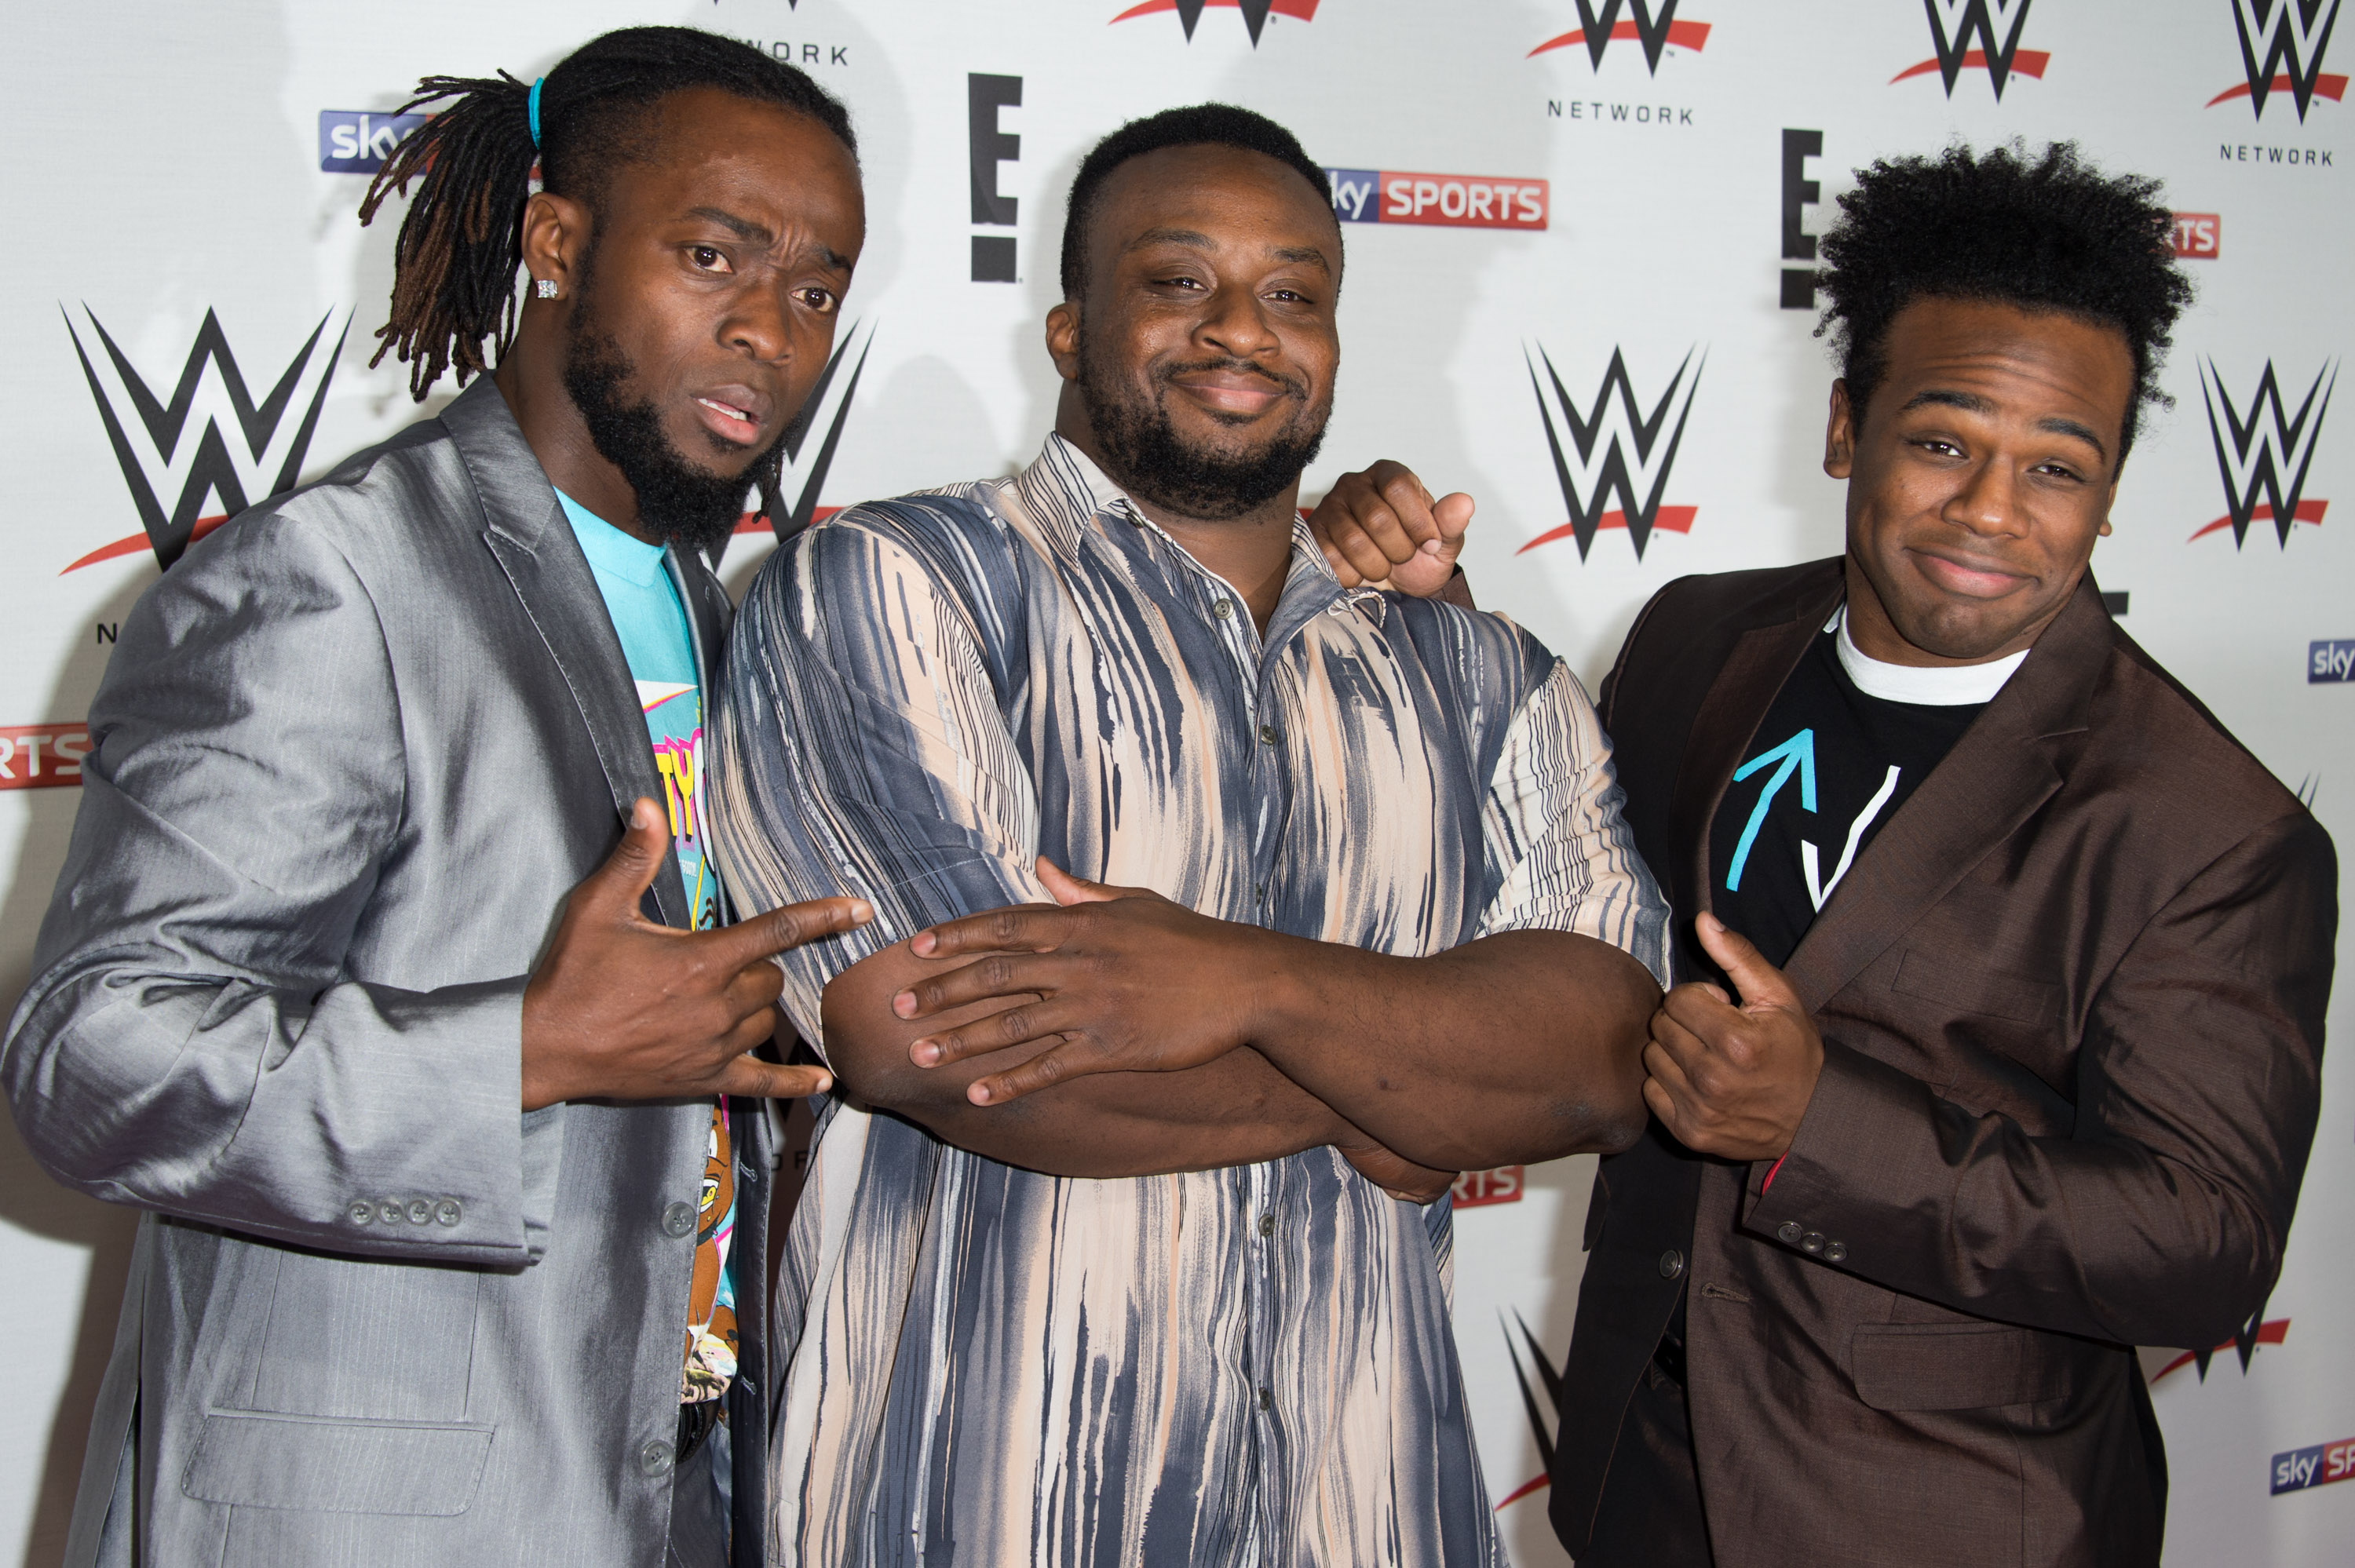 The New Day #15